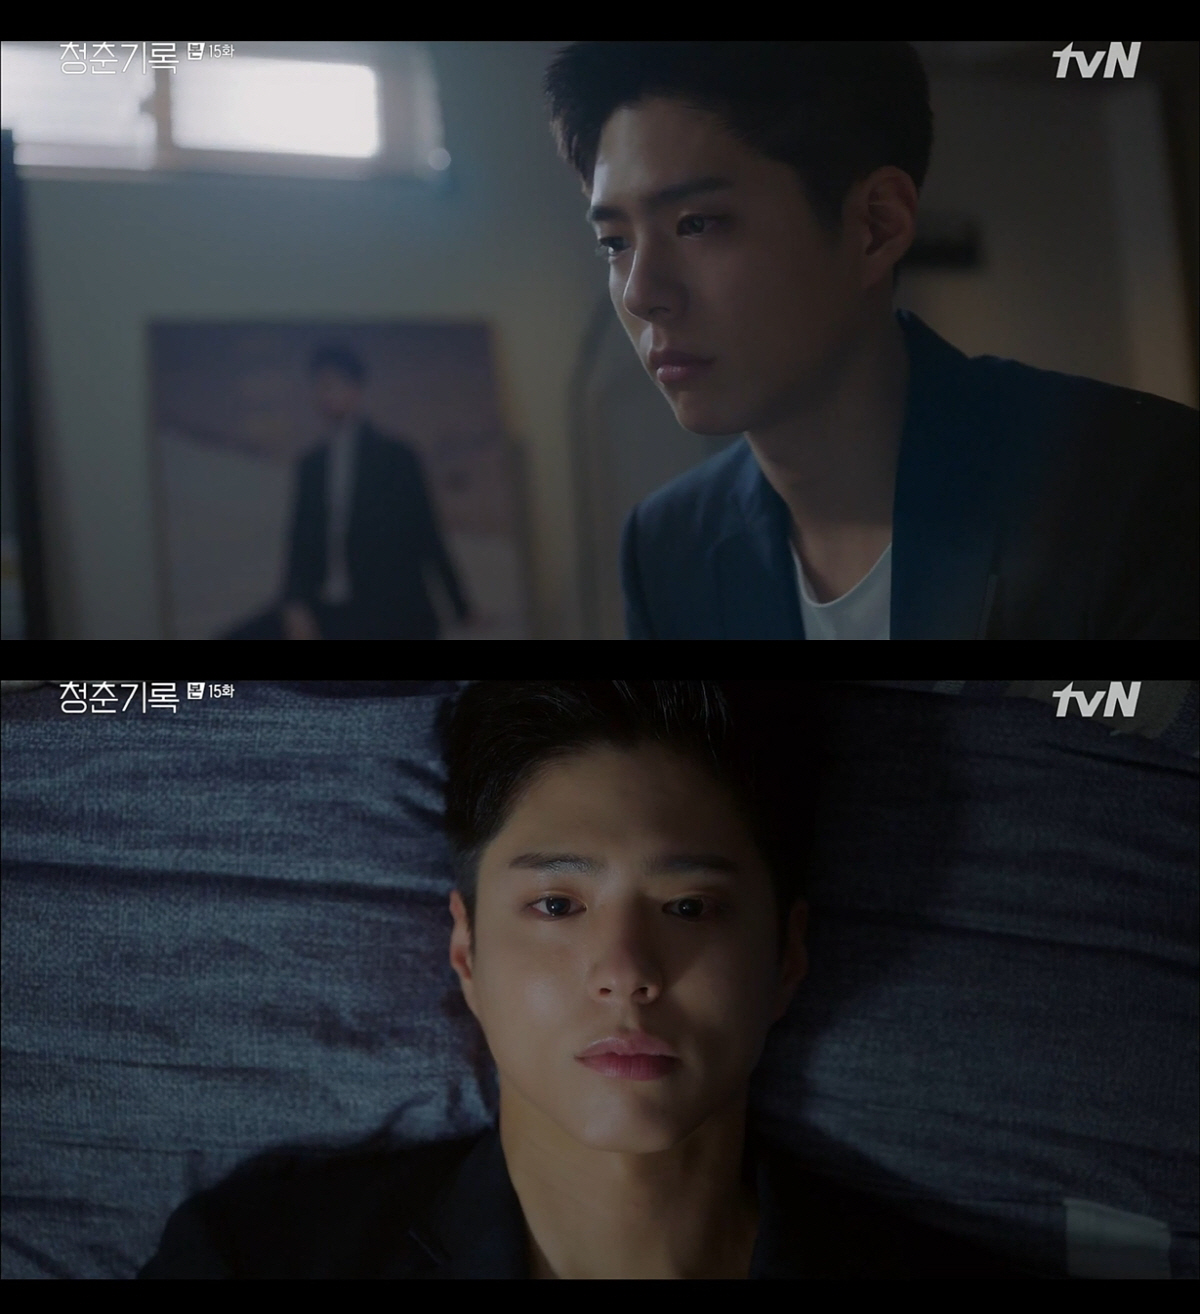 Record of Youth Park Bo-gum expressed regret to viewers with high density emotional acting.In the 15th episode, which aired on the 26th, Park Bo-gum (played by Sa Hye-joon) was portrayed as the moment of separation.He was surrounded by complex feelings in Park So-dams declaration of separation (played by Ahn Jeong-ha), who chose to break up for each other, and he could not speak easily with his eyes flushed.His eyes, which were confused but filled with a sick heart that could not catch his opponent, made the viewers feel sorry.When he returned home, he lay on his bed and showed his tiredness with his empty eyes, and he was saddened by his sadness in a difficult situation that was not like his heart, such as love and all things.His appearance of enduring himself without bursting into emotion even when various situations flowed in a frustrating way made him see the deep inner desire to protect what he wanted to keep.Park Bo-gum has drawn these complex feelings with a sad eye and made viewers completely immersed.In addition, the subsequent aftermath of the breakup caused him to collapse, recalling the past days when he had to convey his love and sorry.Park Bo-gum stimulated the tears of the viewers by leading the dramatic atmosphere to the peak with sorry and sad eyes and the Best Tears Acting.In the ending, he showed an emotional performance that can not be taken off his eyes. He visited Park So-dam and said, I can not break up with you.Park Bo-gums determined but gentle eyes revealed the desperate feelings of Sa Hye-joon and made the audiences Chest beautiful.On this day, Park Bo-gum delicately expresses the complex psychology of Sa Hye-joon in various difficult situations with high-density emotional acting and completed the narrative of the character in depth.It is said that Park Bo-gums Acting, which conveys all emotions perfectly even with one eye, has added immersion.